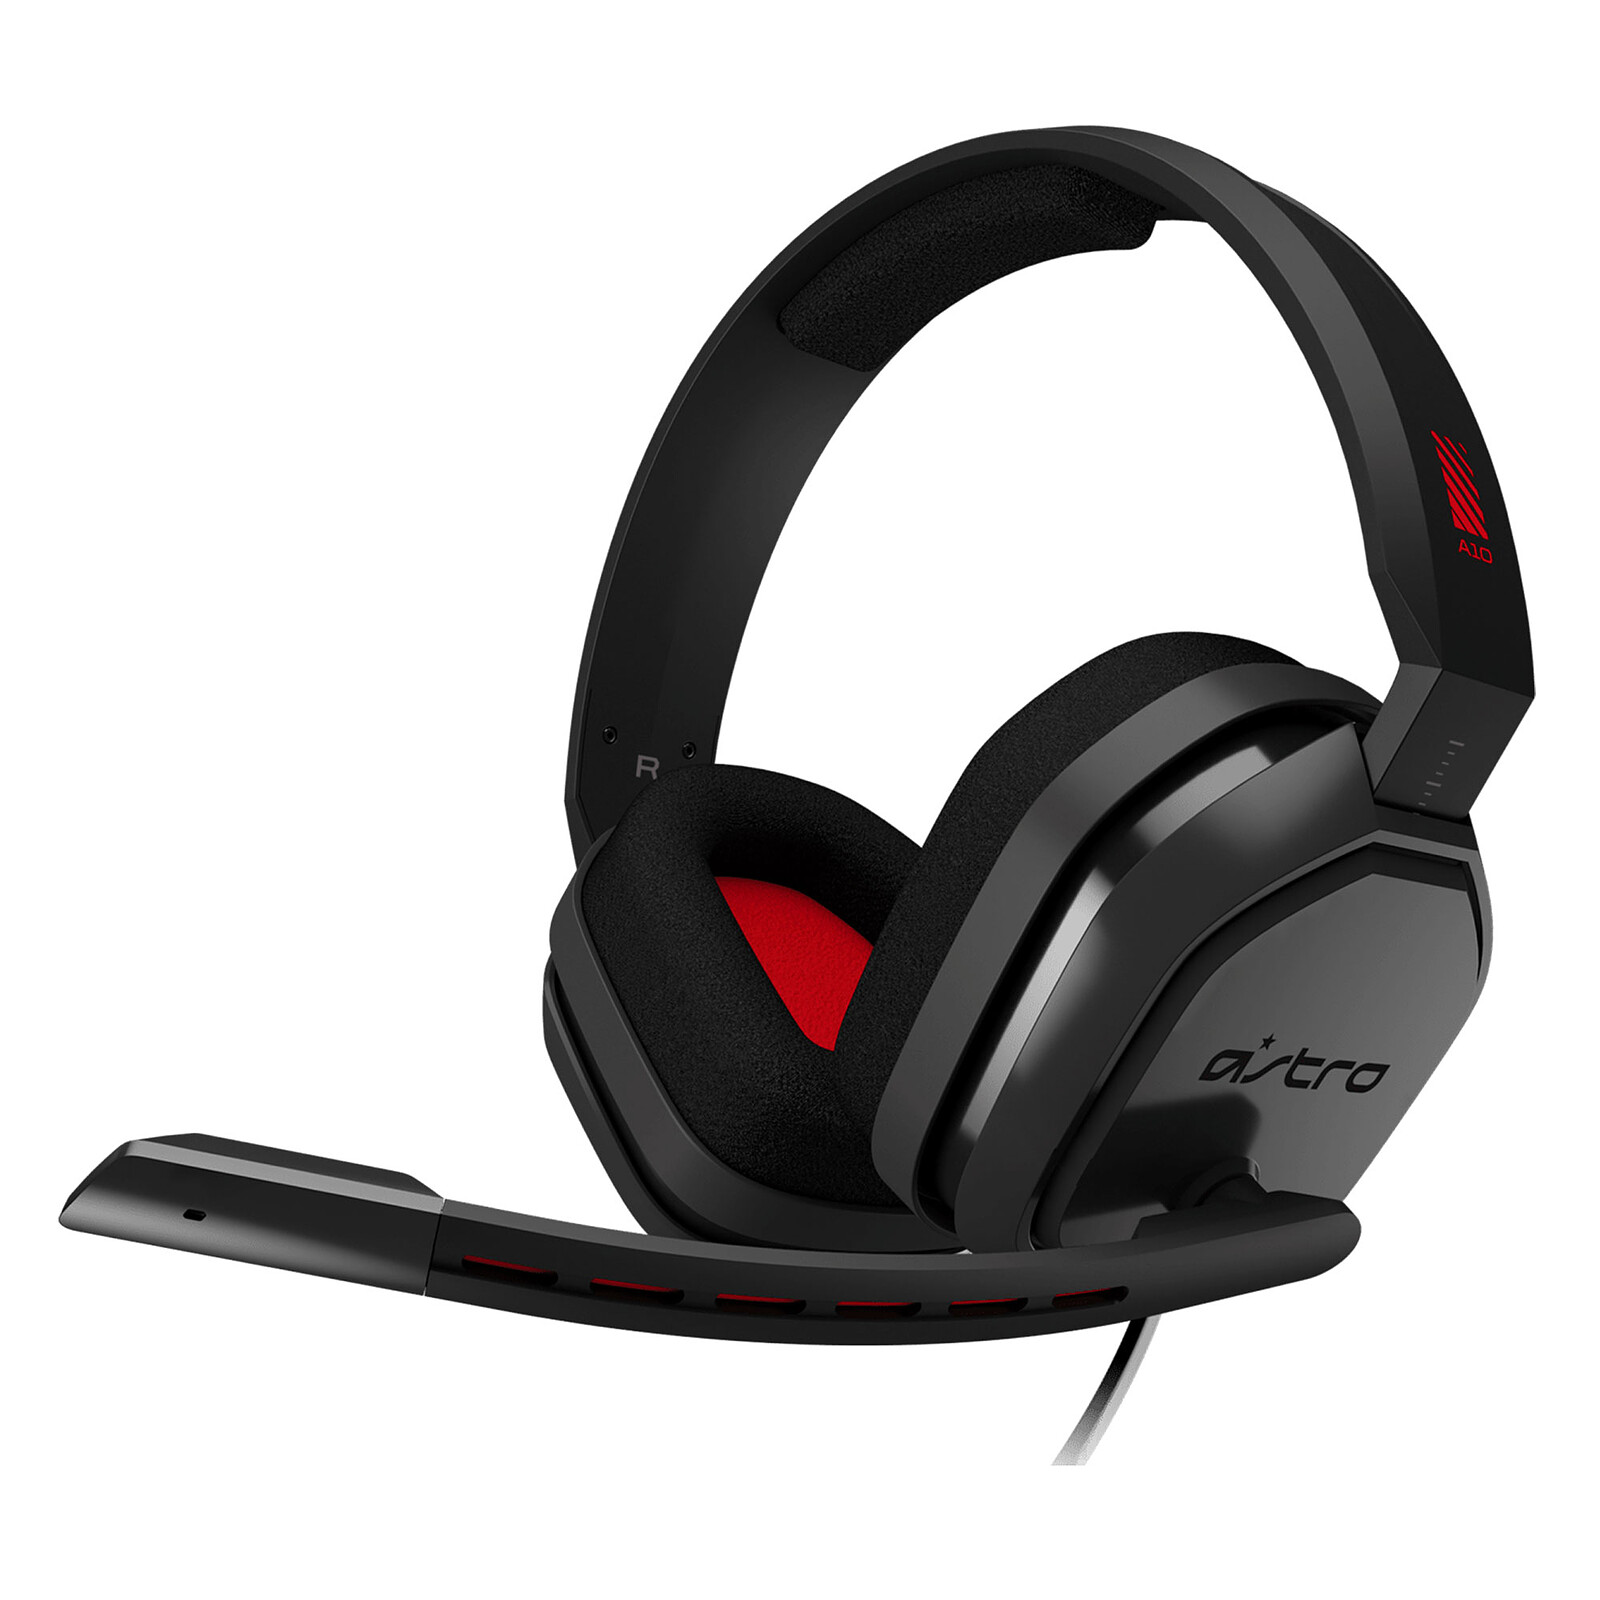 Astro A10 Gris/Rouge (PC/Mac/Xbox One/PlayStation 4/Switch/Mobiles) - Micro- casque - Garantie 3 ans LDLC